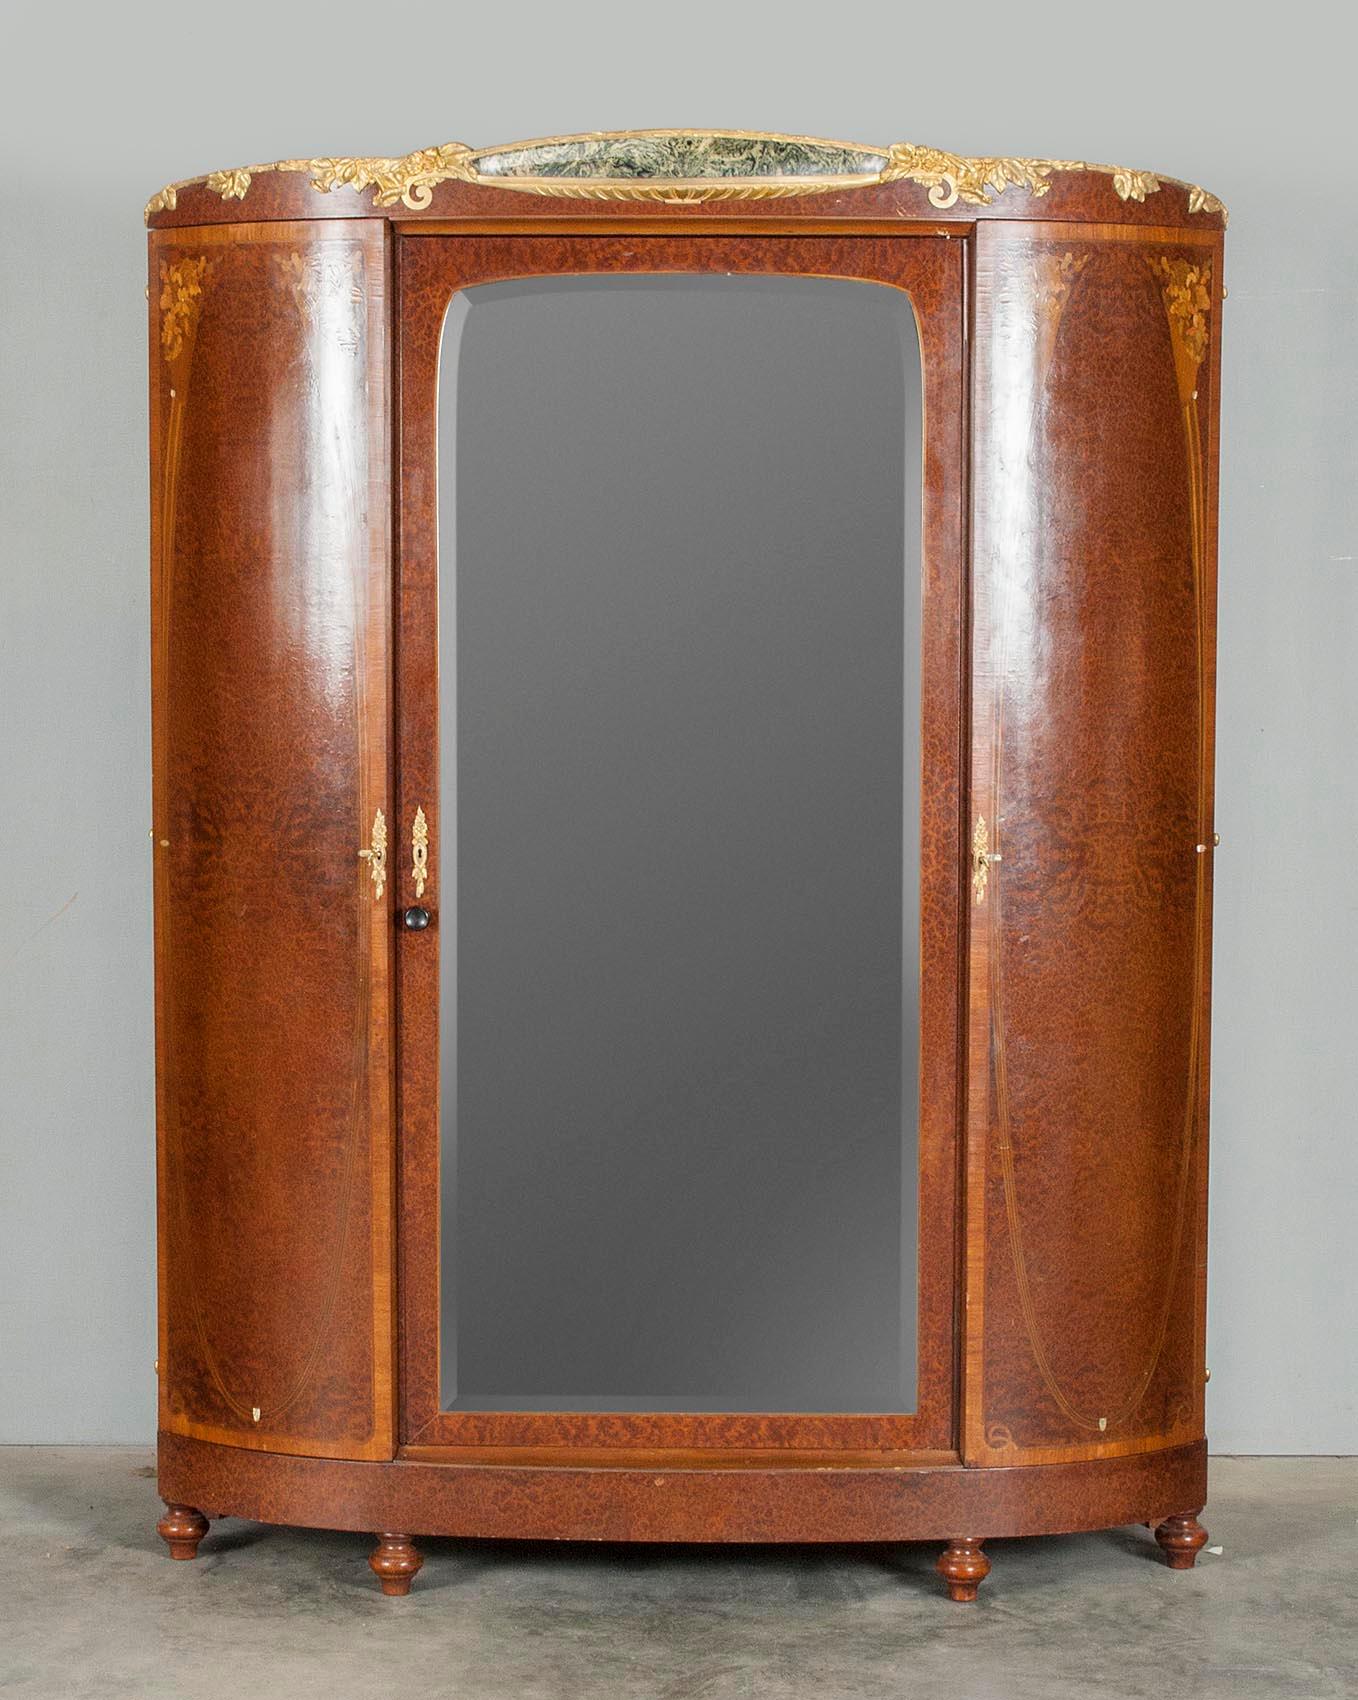 French wardrobe cabinet in Art Nouveau style.
This wardrobe cabinet has curved doors and a mirrored glass in the middle door.
The cabinet is veneered with mainly burr walnut and various other types of wood. Mother of pearl accents.
The base,